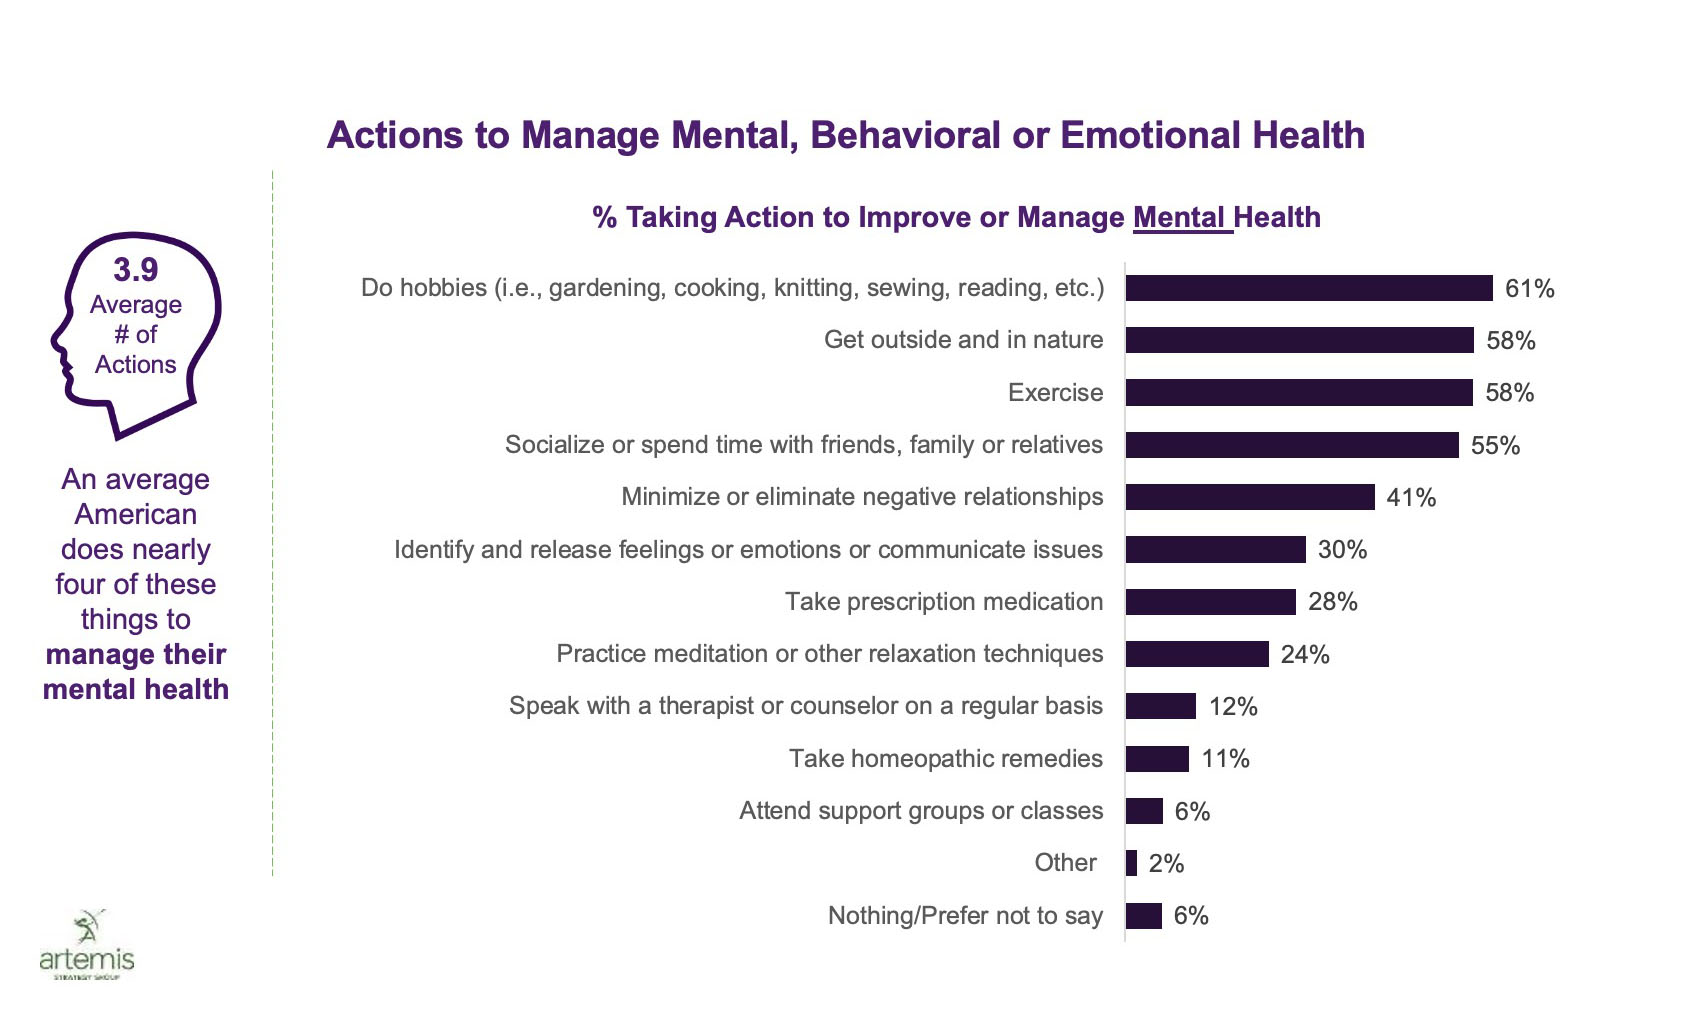 Actions to Manage Mental, Behavioral or Emotional Health